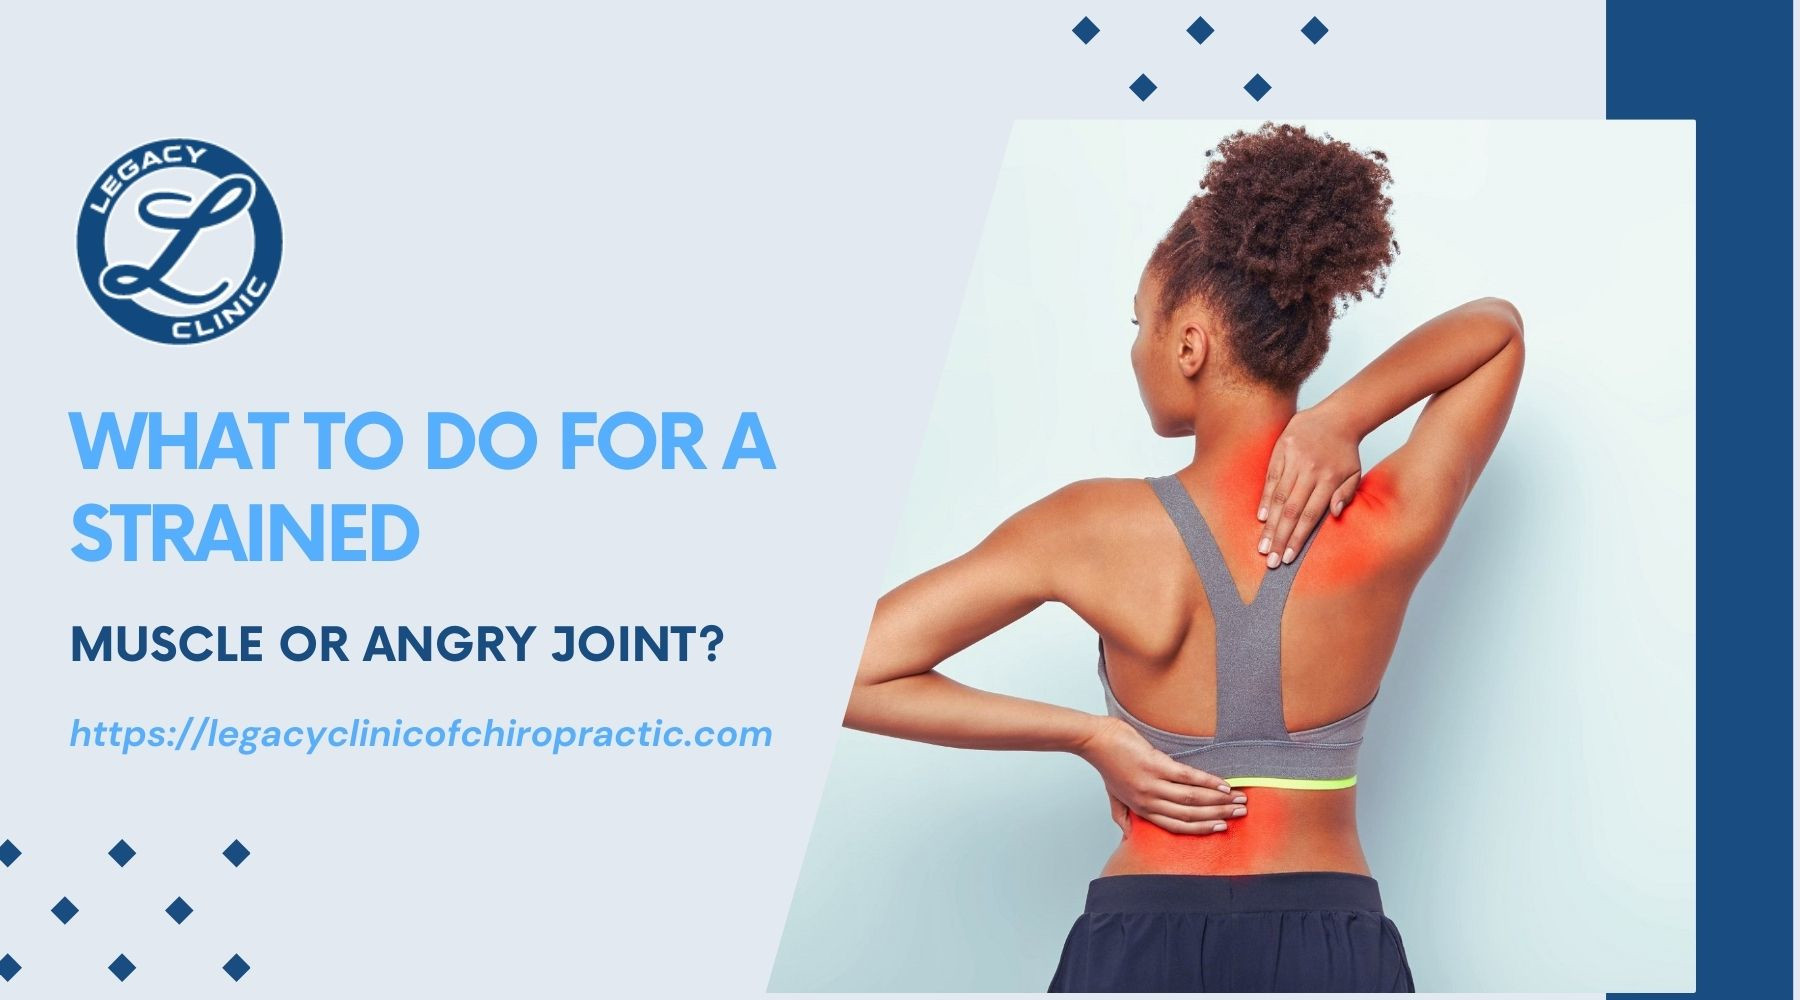 What to Do for a Strained Muscle or Angry Joint?